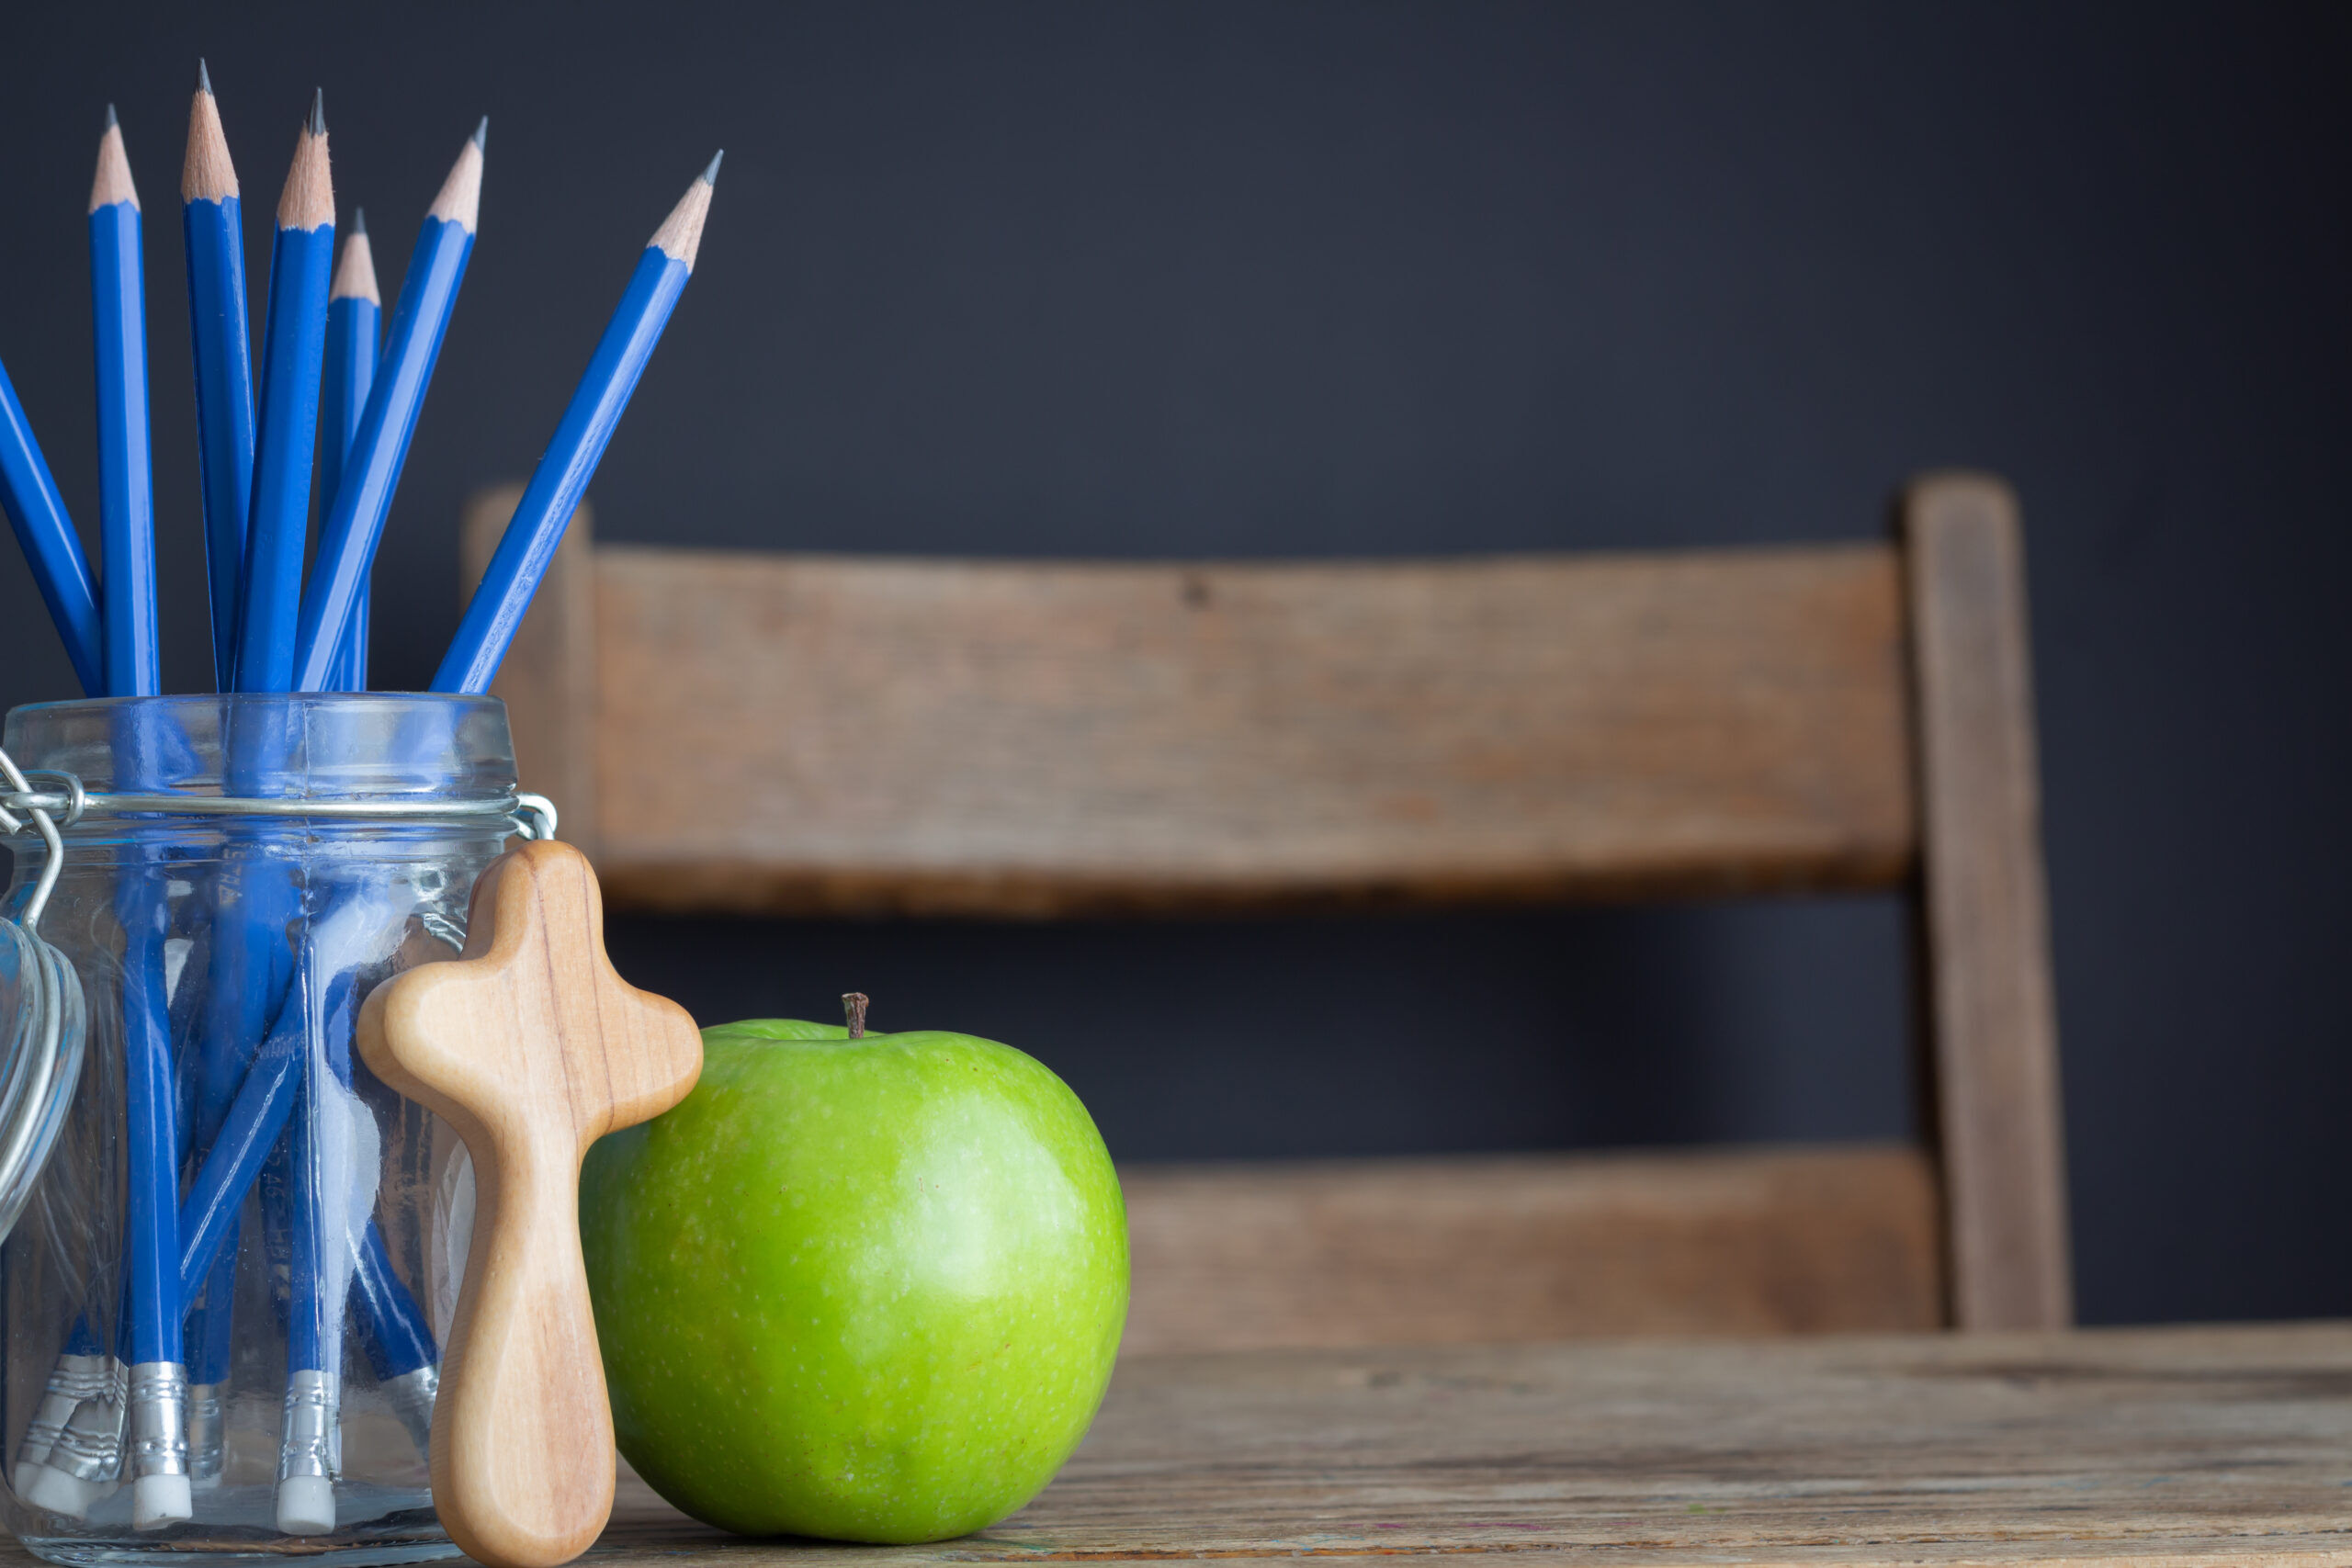 green apple, christian cross and jar of pencils on wood school desk with black background